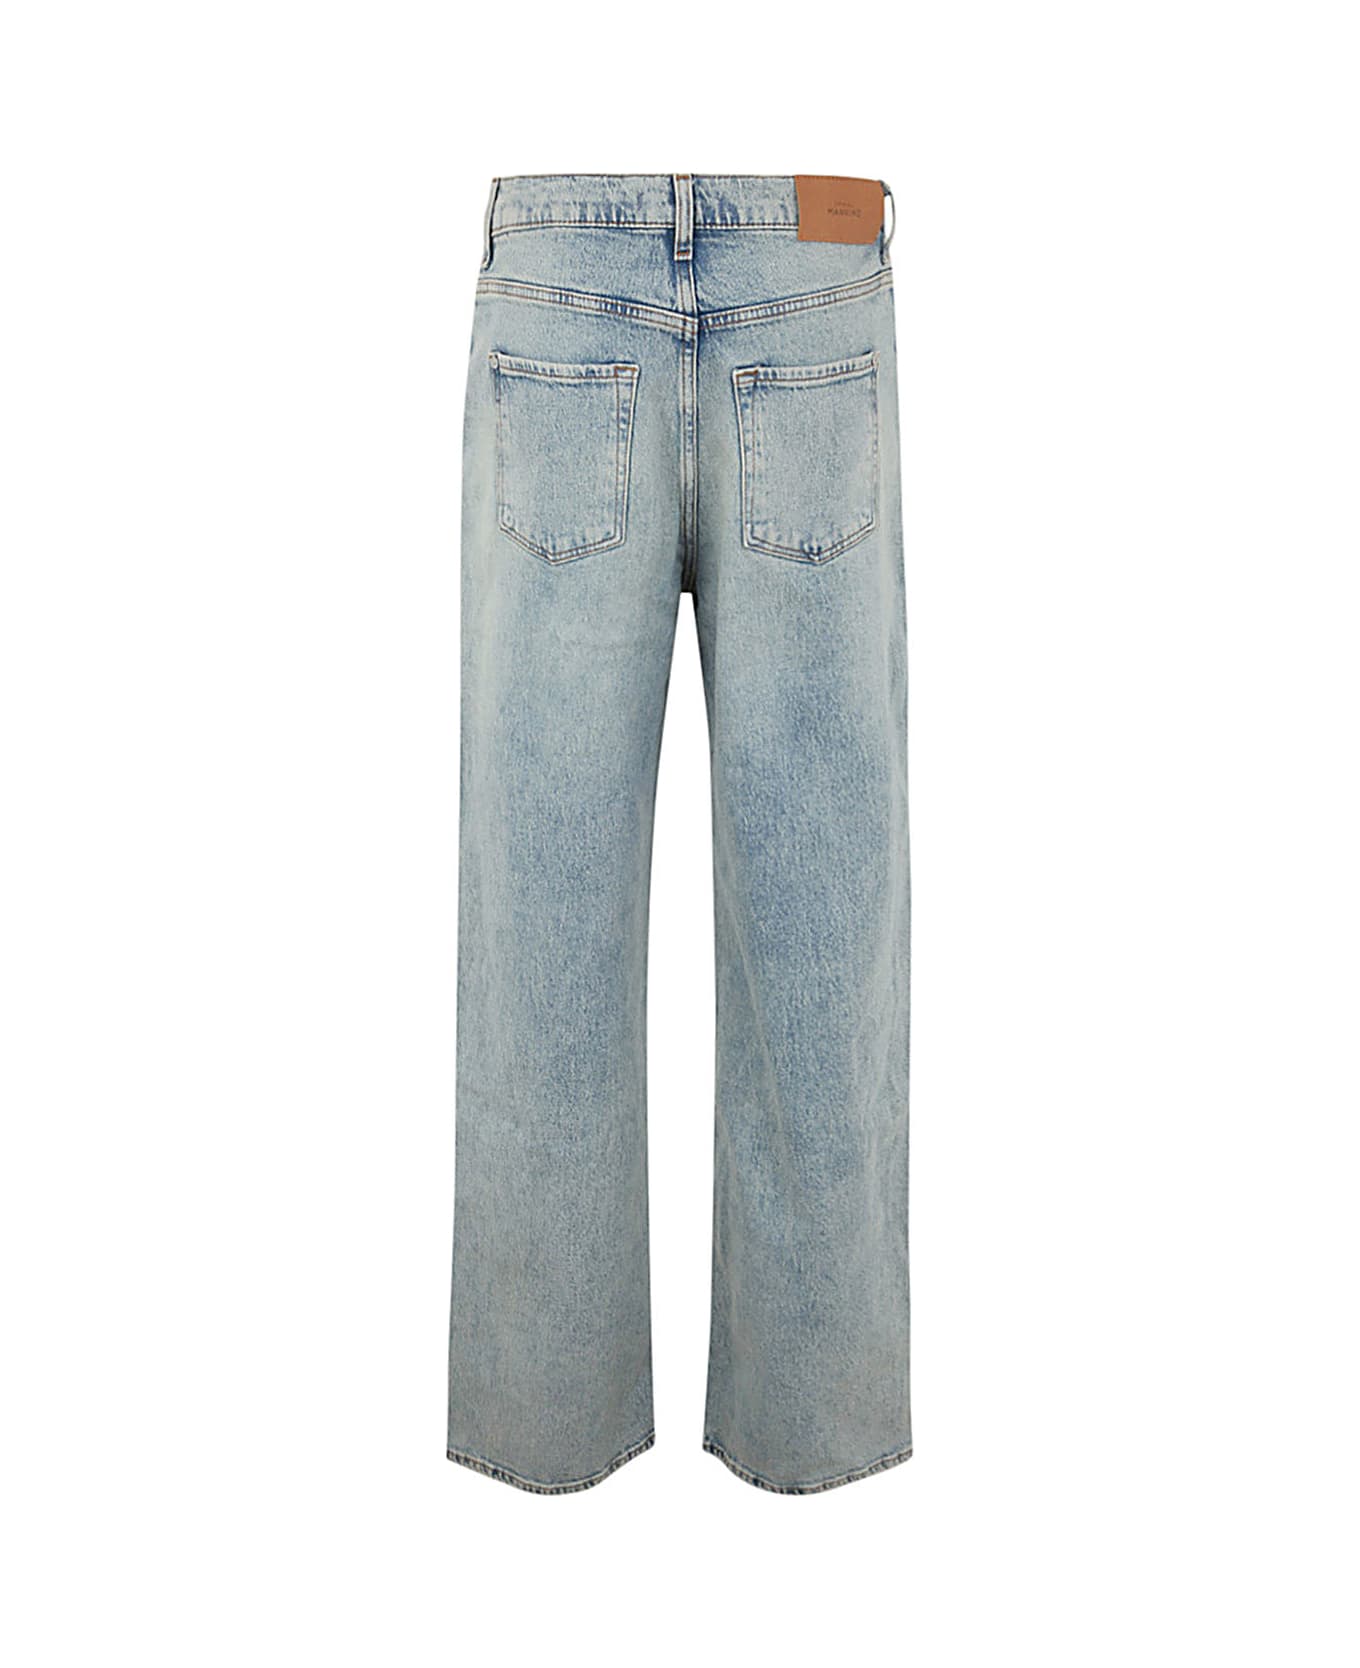 7 For All Mankind Scout Frost Jeans - Light Blue